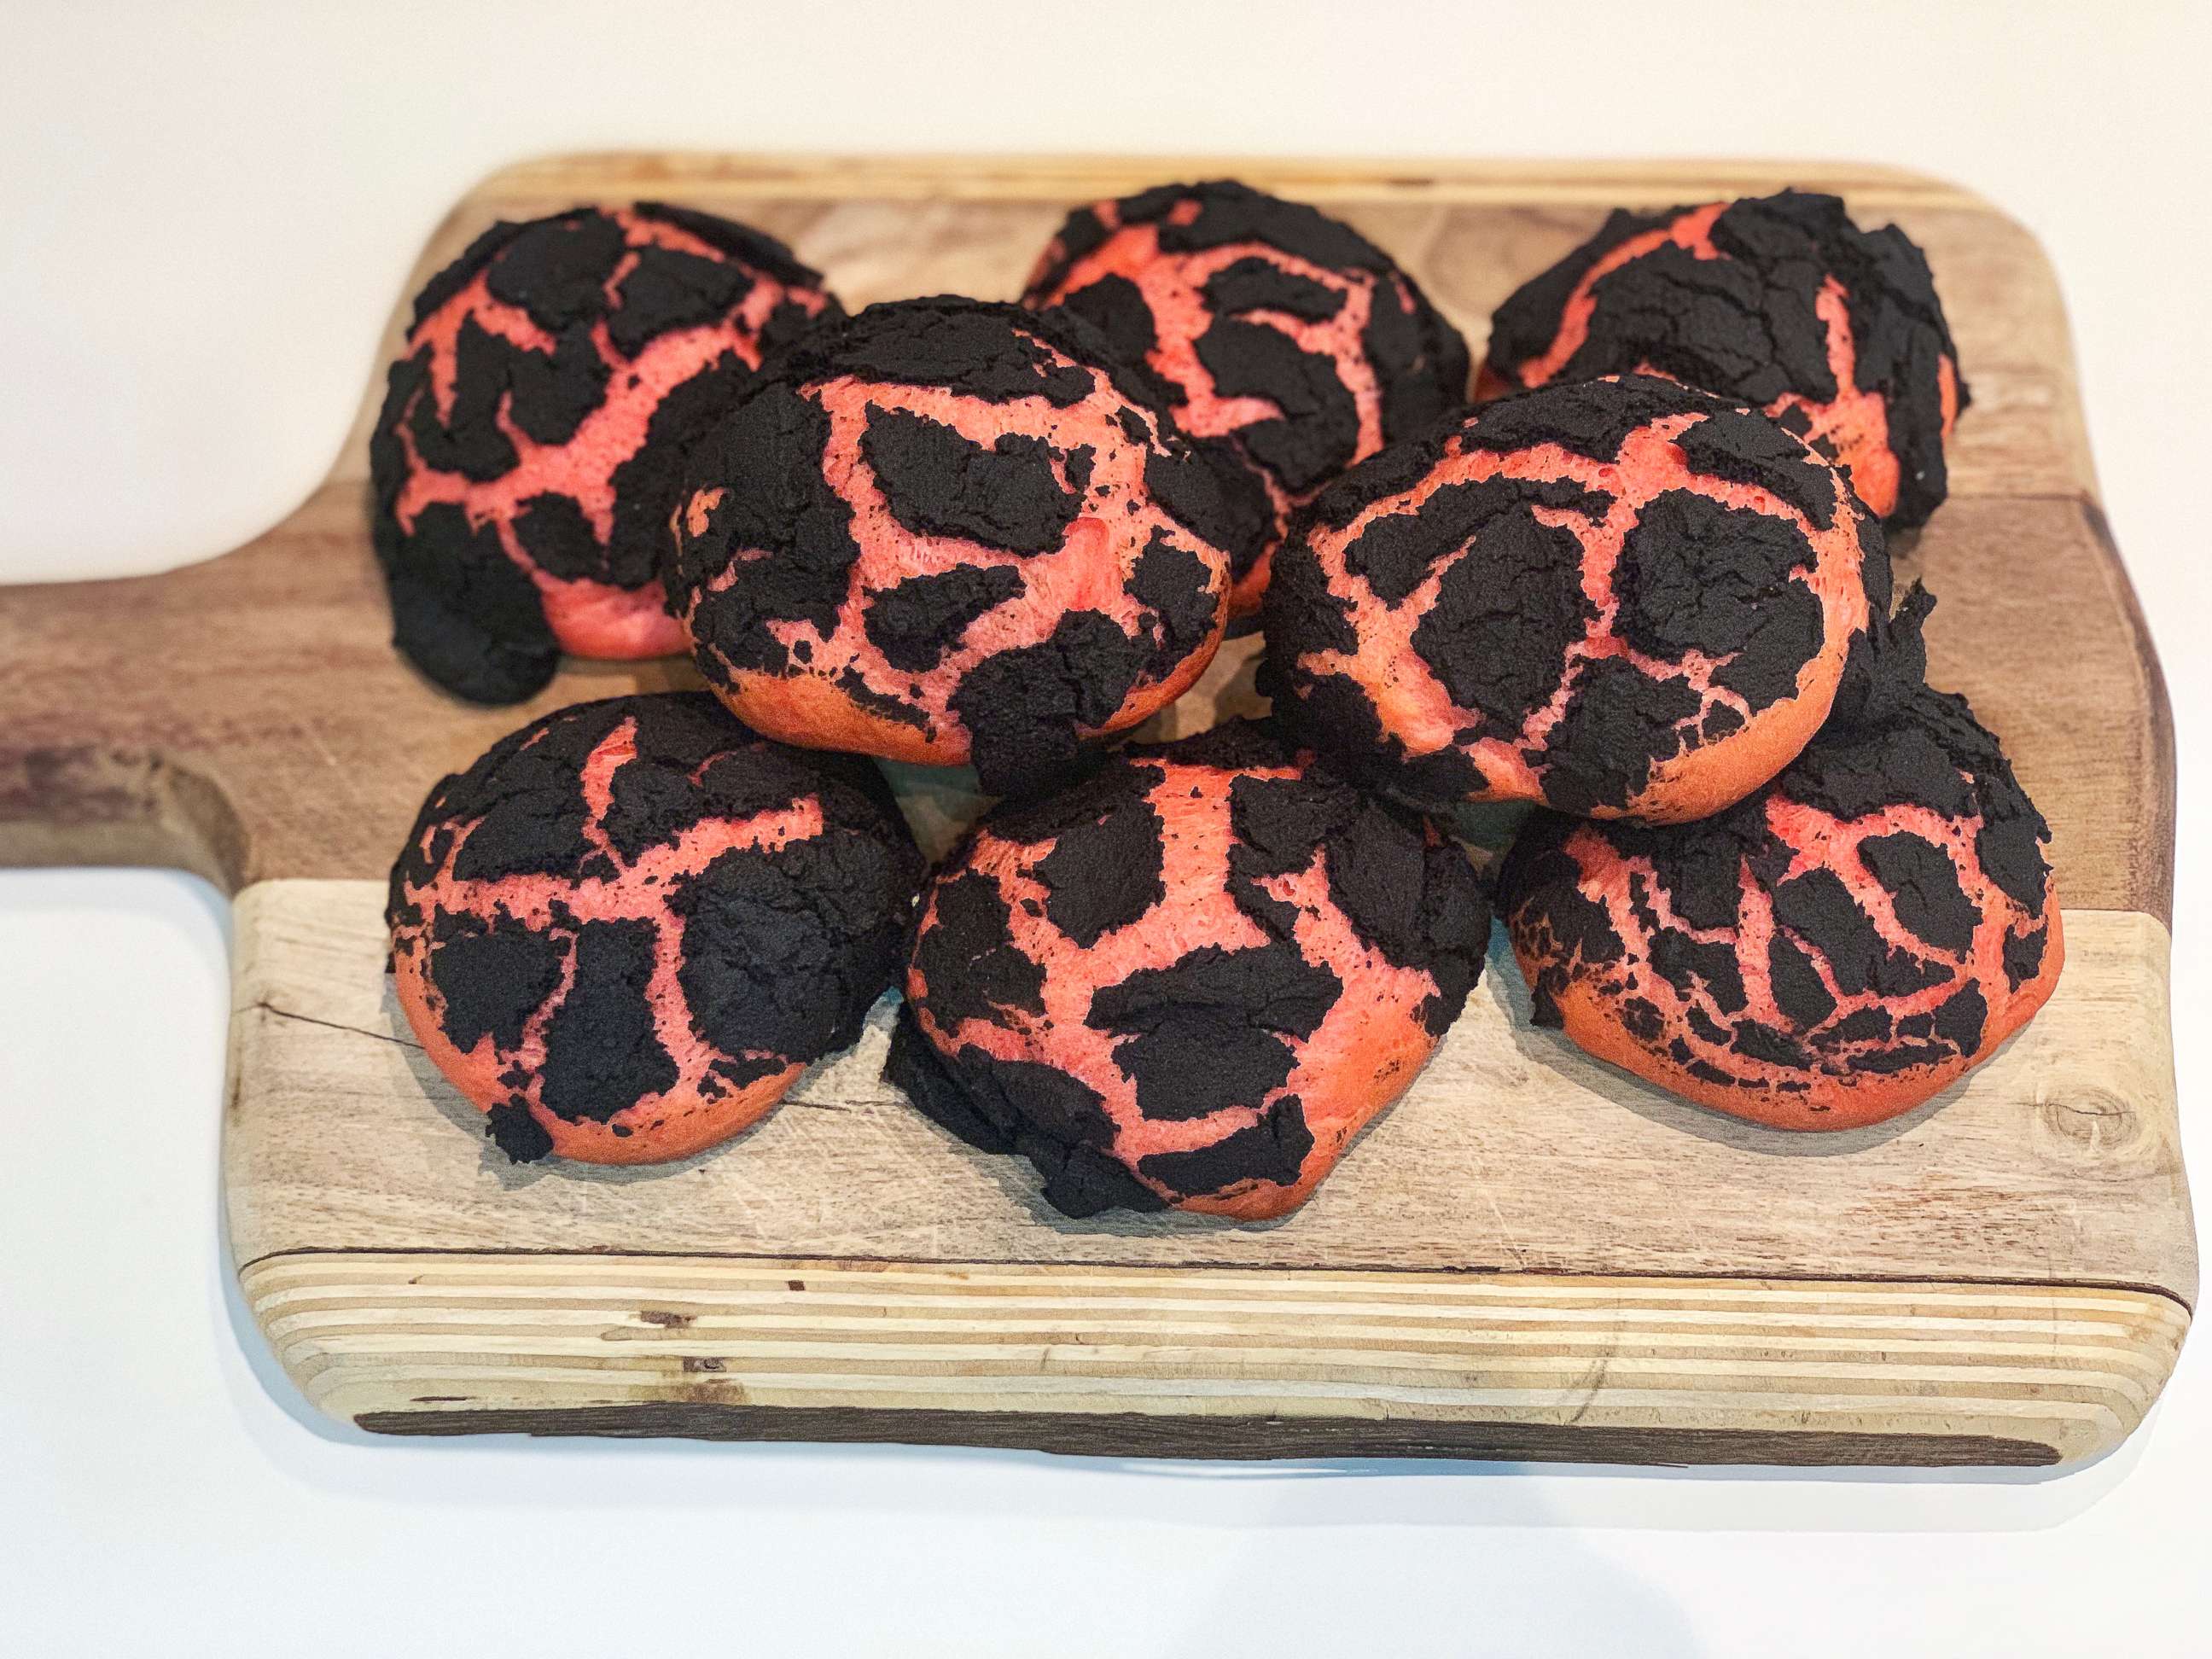 PHOTO: I made Pinterest's top 10 Halloween recipes of 2019, which included Brimstone bread.